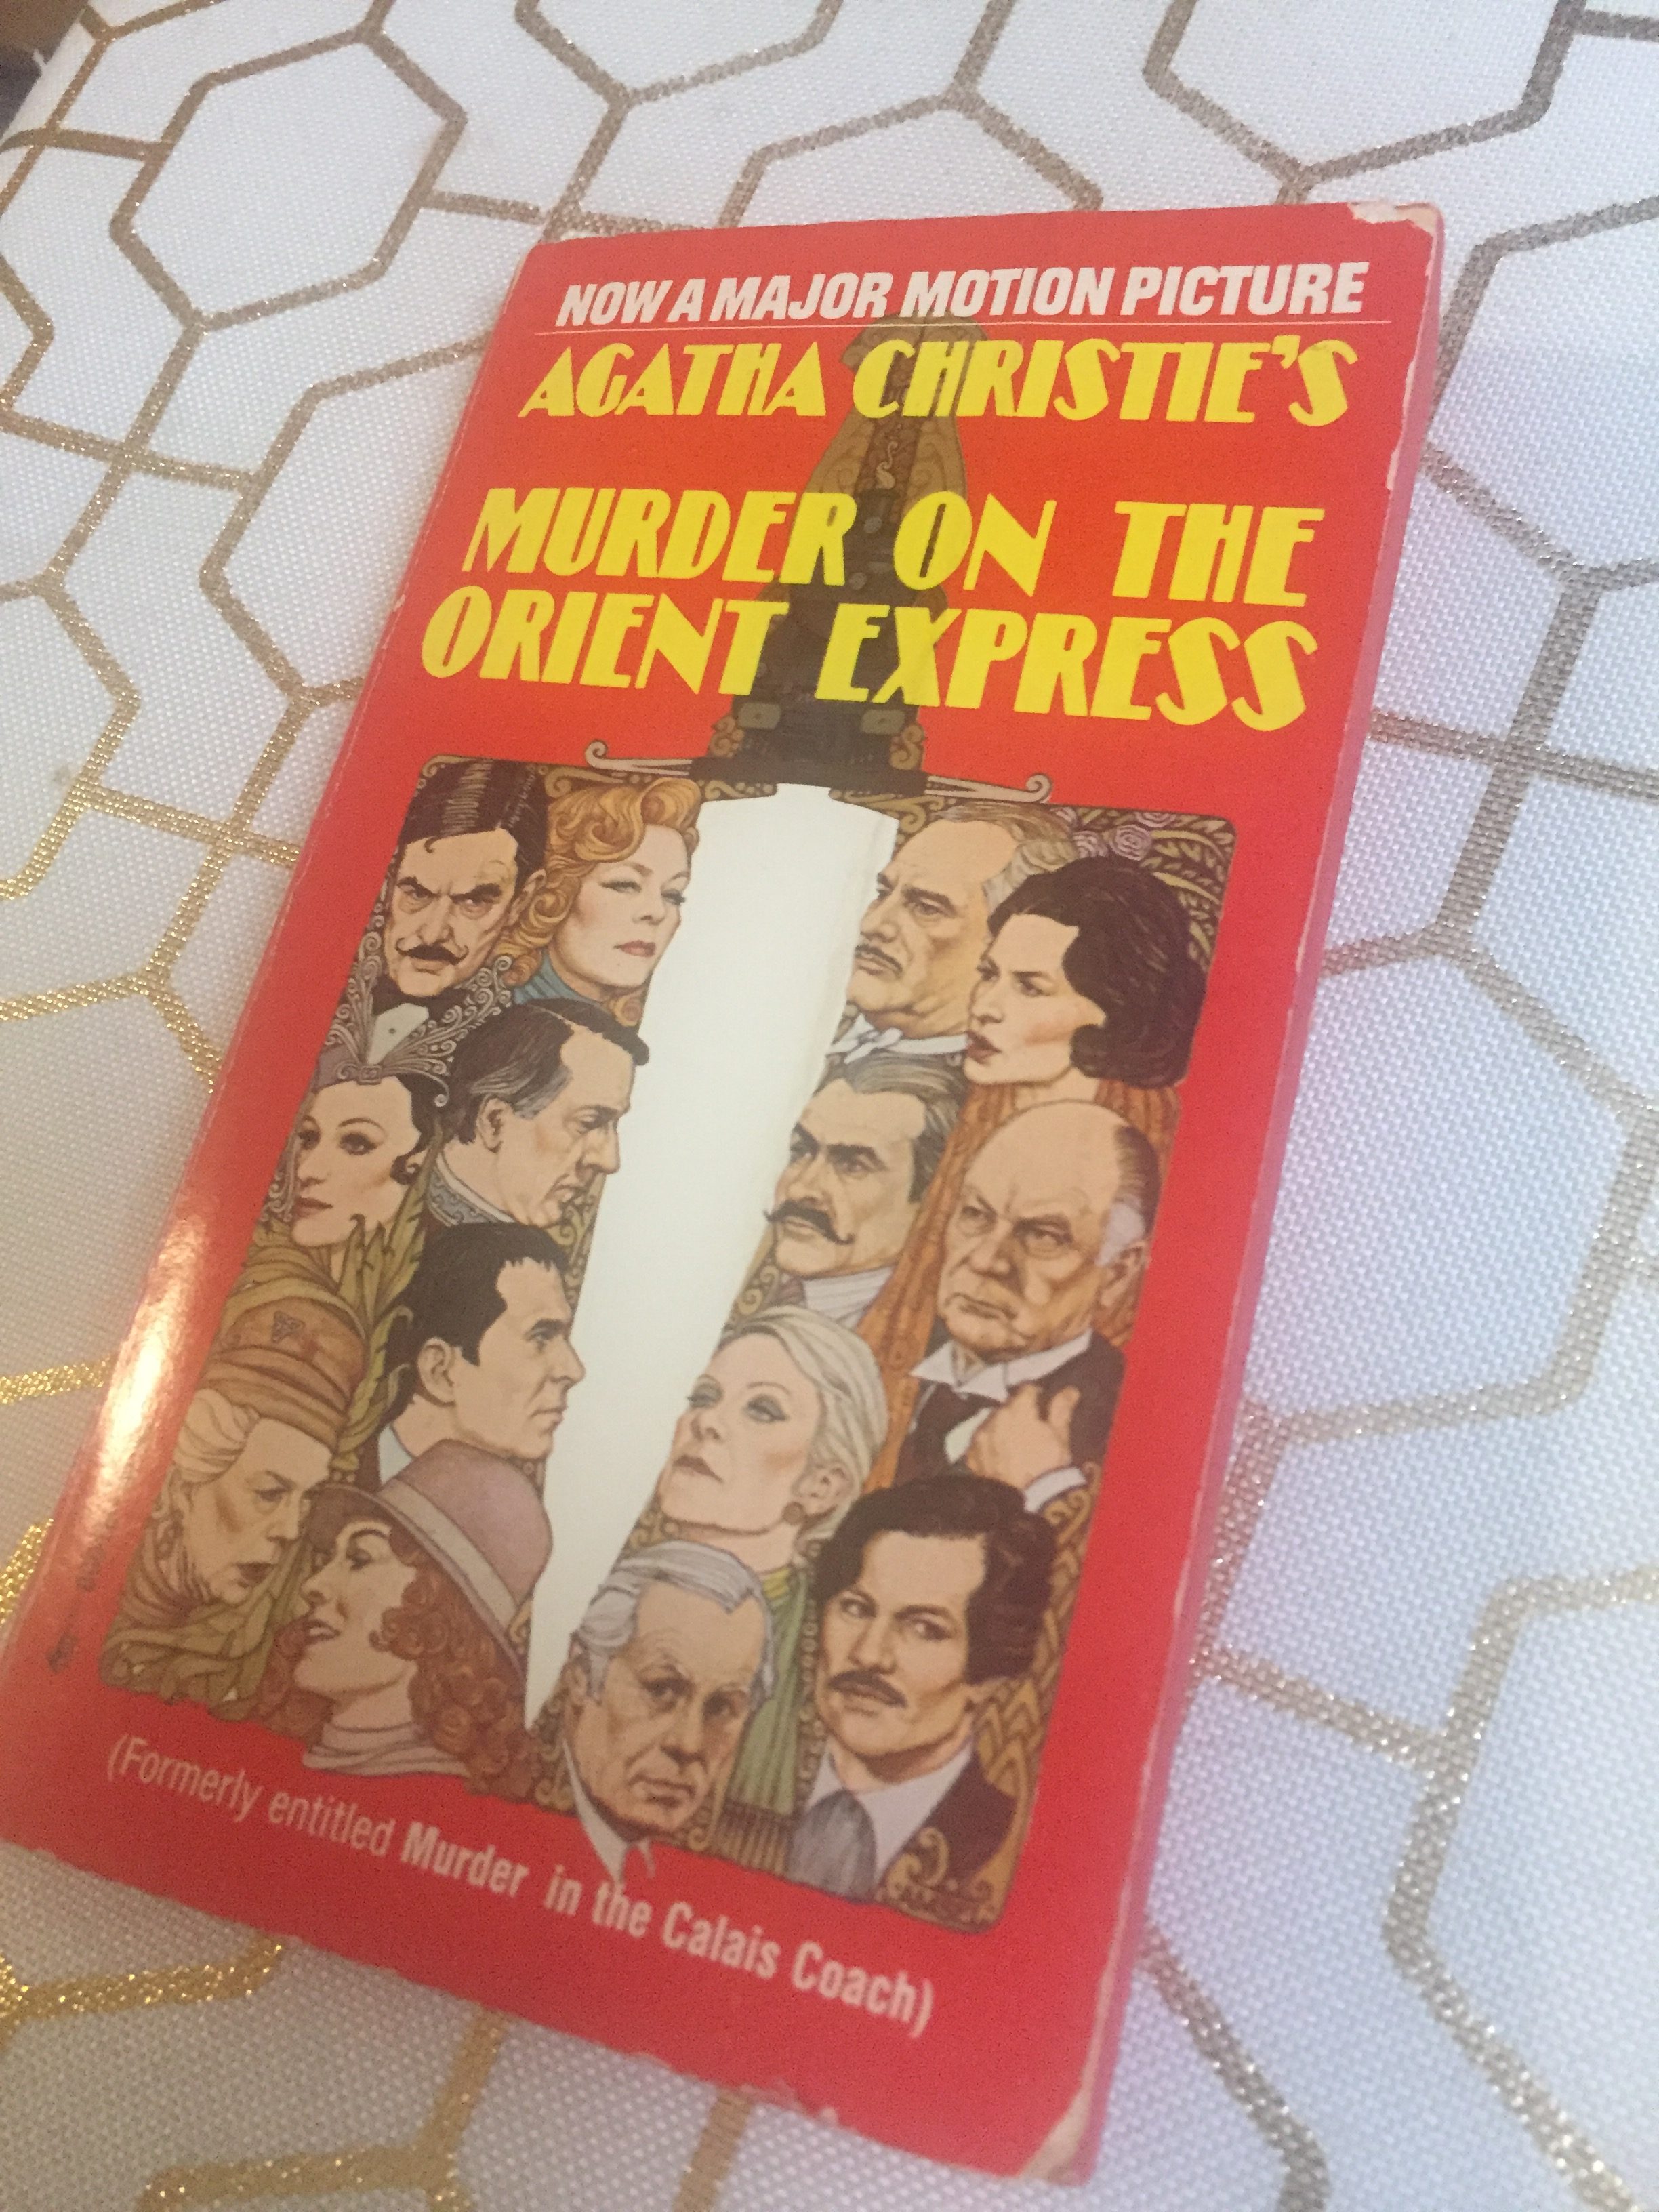 old book jacket of murder on the orient express